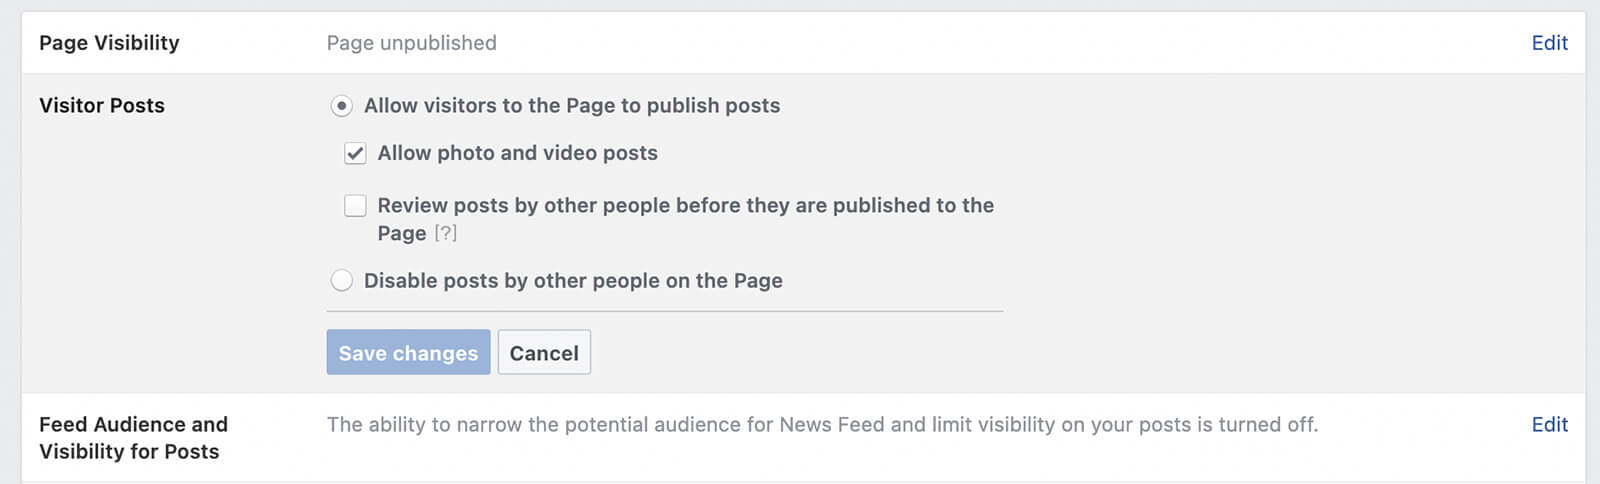 how-to-prevent-visitor-posts-on-your-facebook-business-page-classic-pages-settings-general-tab-edit-visitor-posts-allow-or-disable-example-12